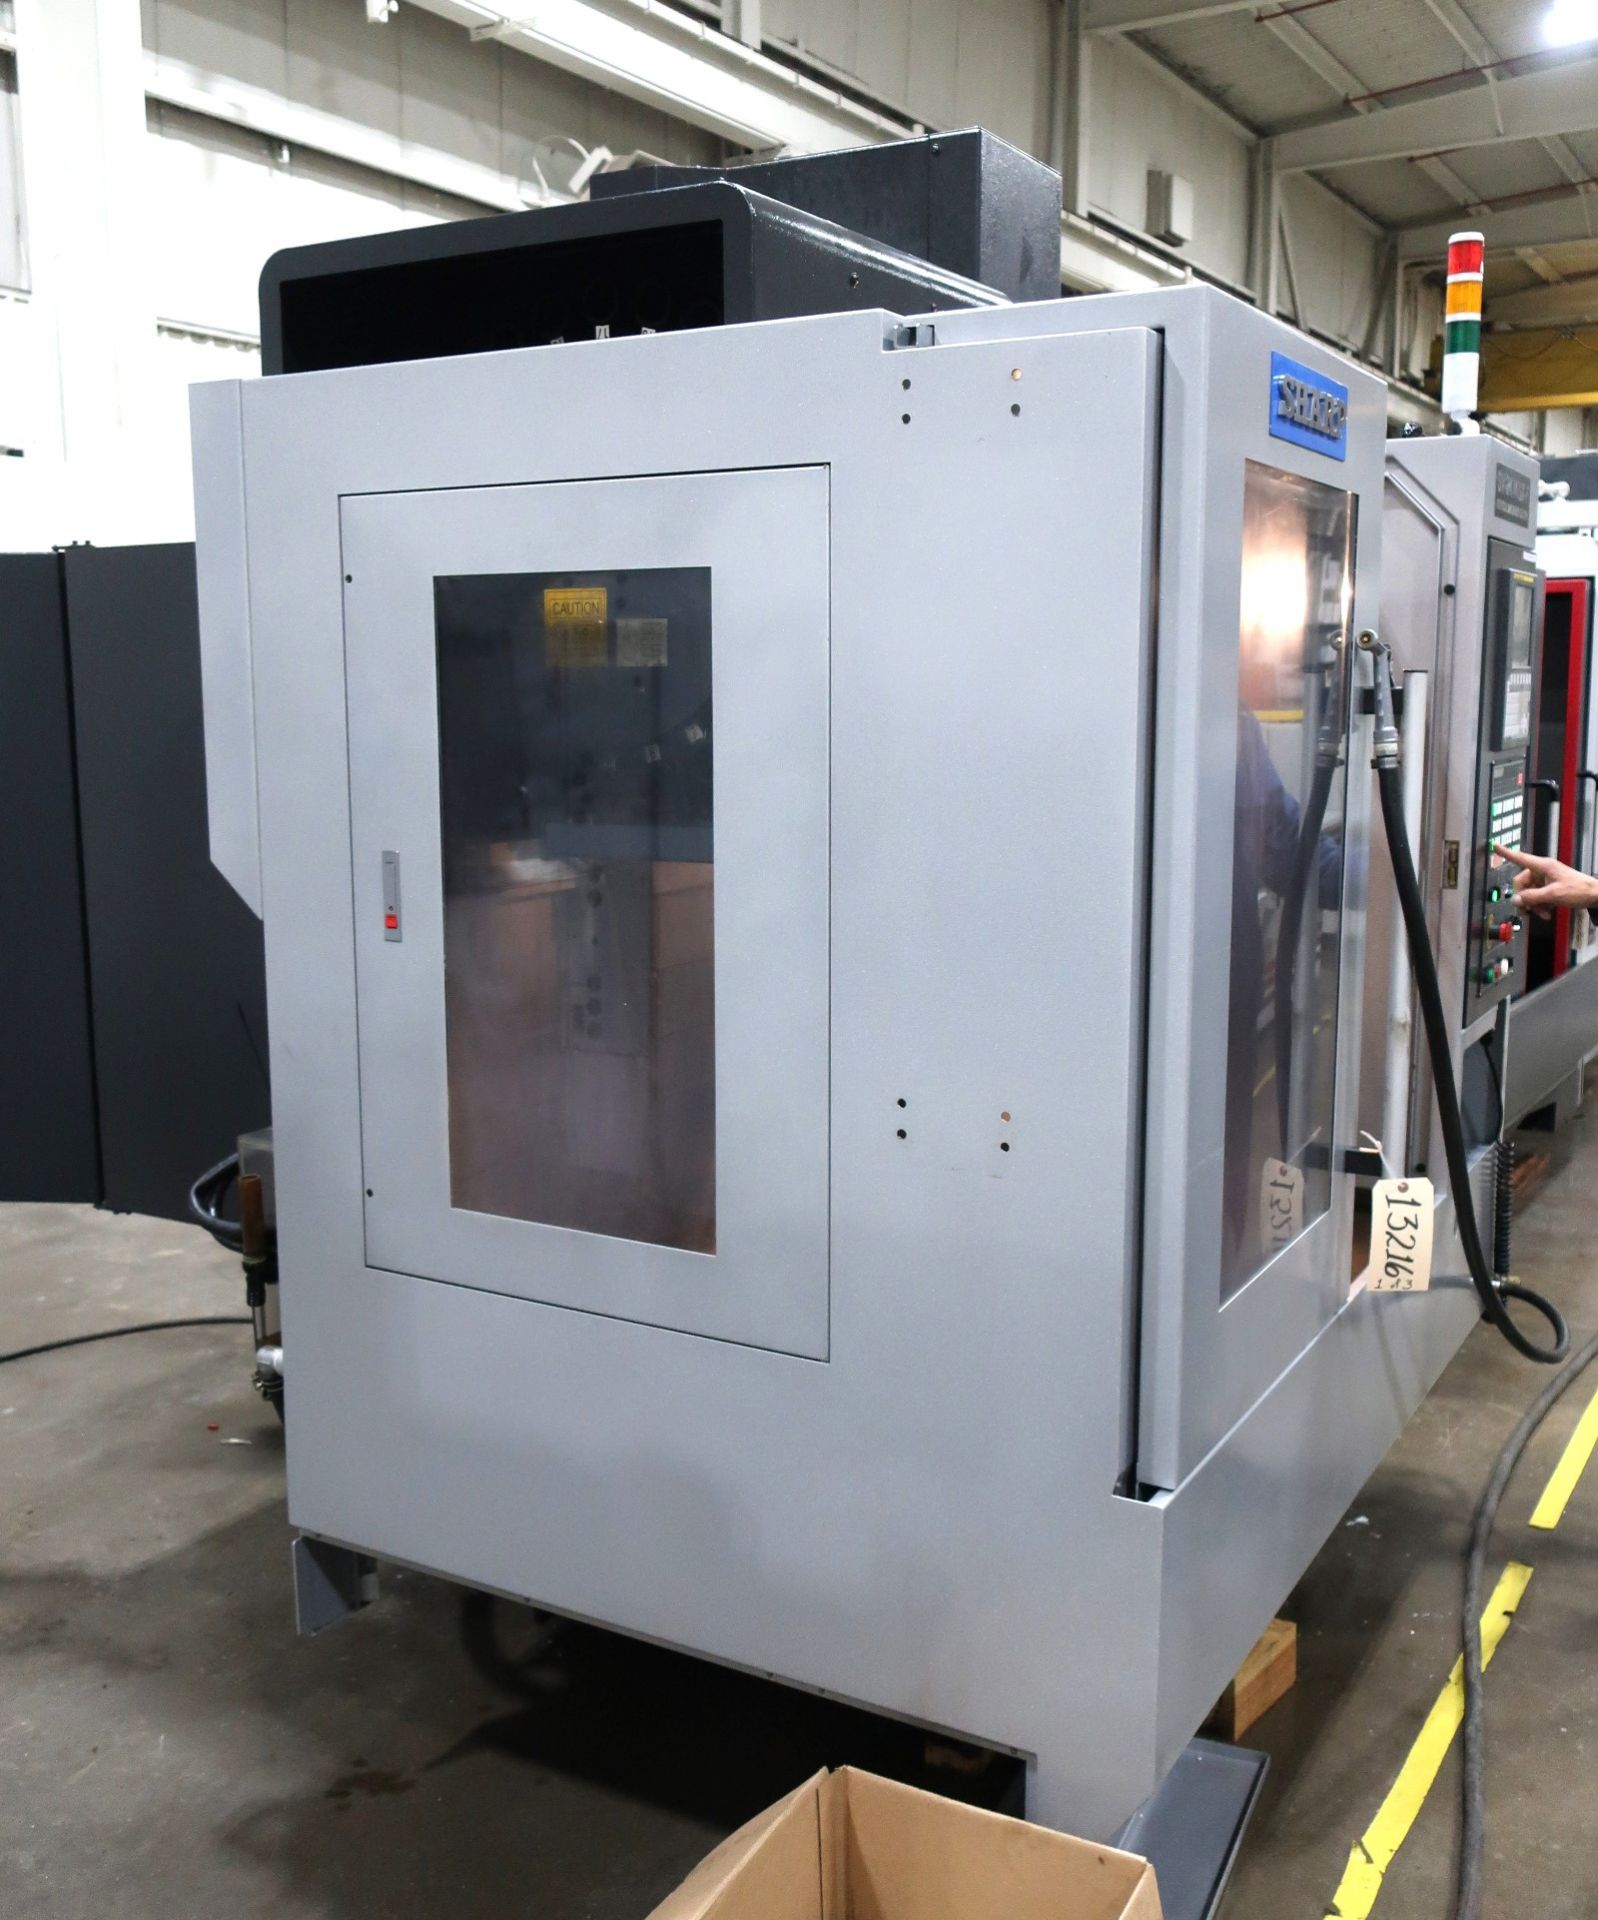 SHARP SV-2414SX-F CNC 3-AXIS VERTICAL MACHINING CENTER, S/N 6039, NEW 2014 - Image 7 of 12